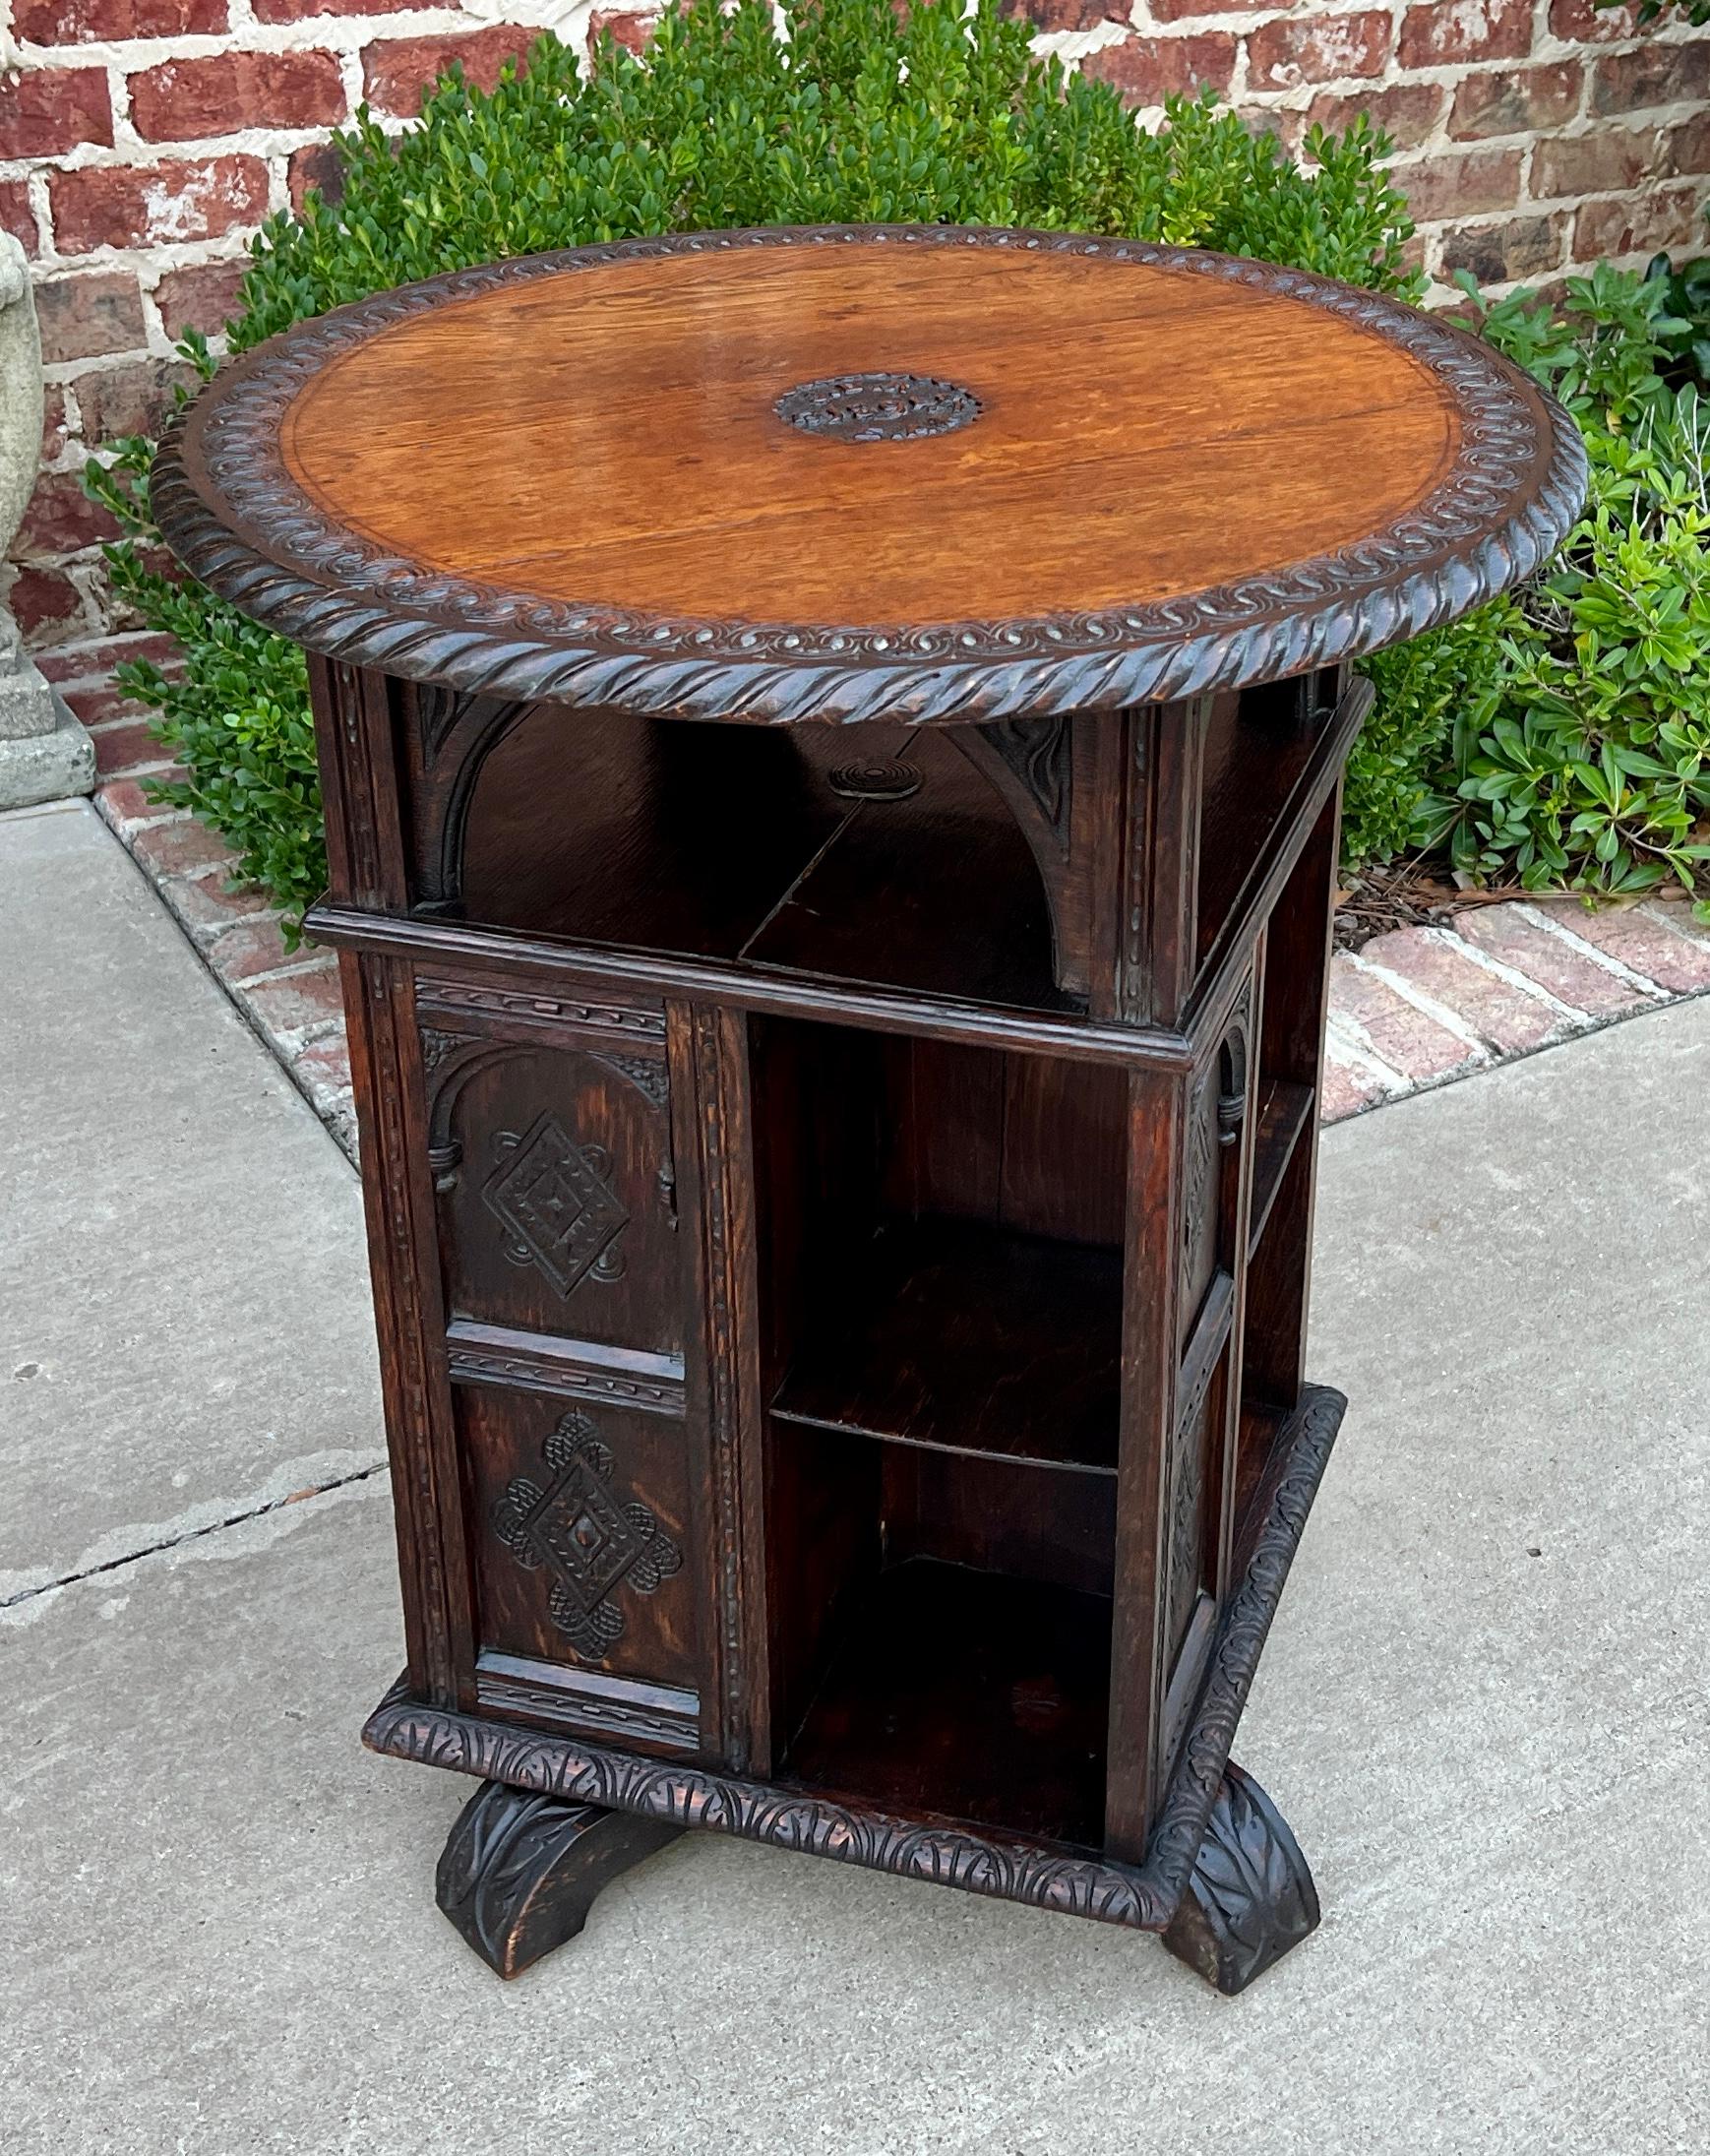 BEAUTIFUL and UNIQUE Antique English Oak Revolving Bookcase or Display Cabinet with Round Table Top~~c. 1890s

PERFECT for displaying your favorite antique books or collectibles~~round top surface above shelves is flat for additional display or use